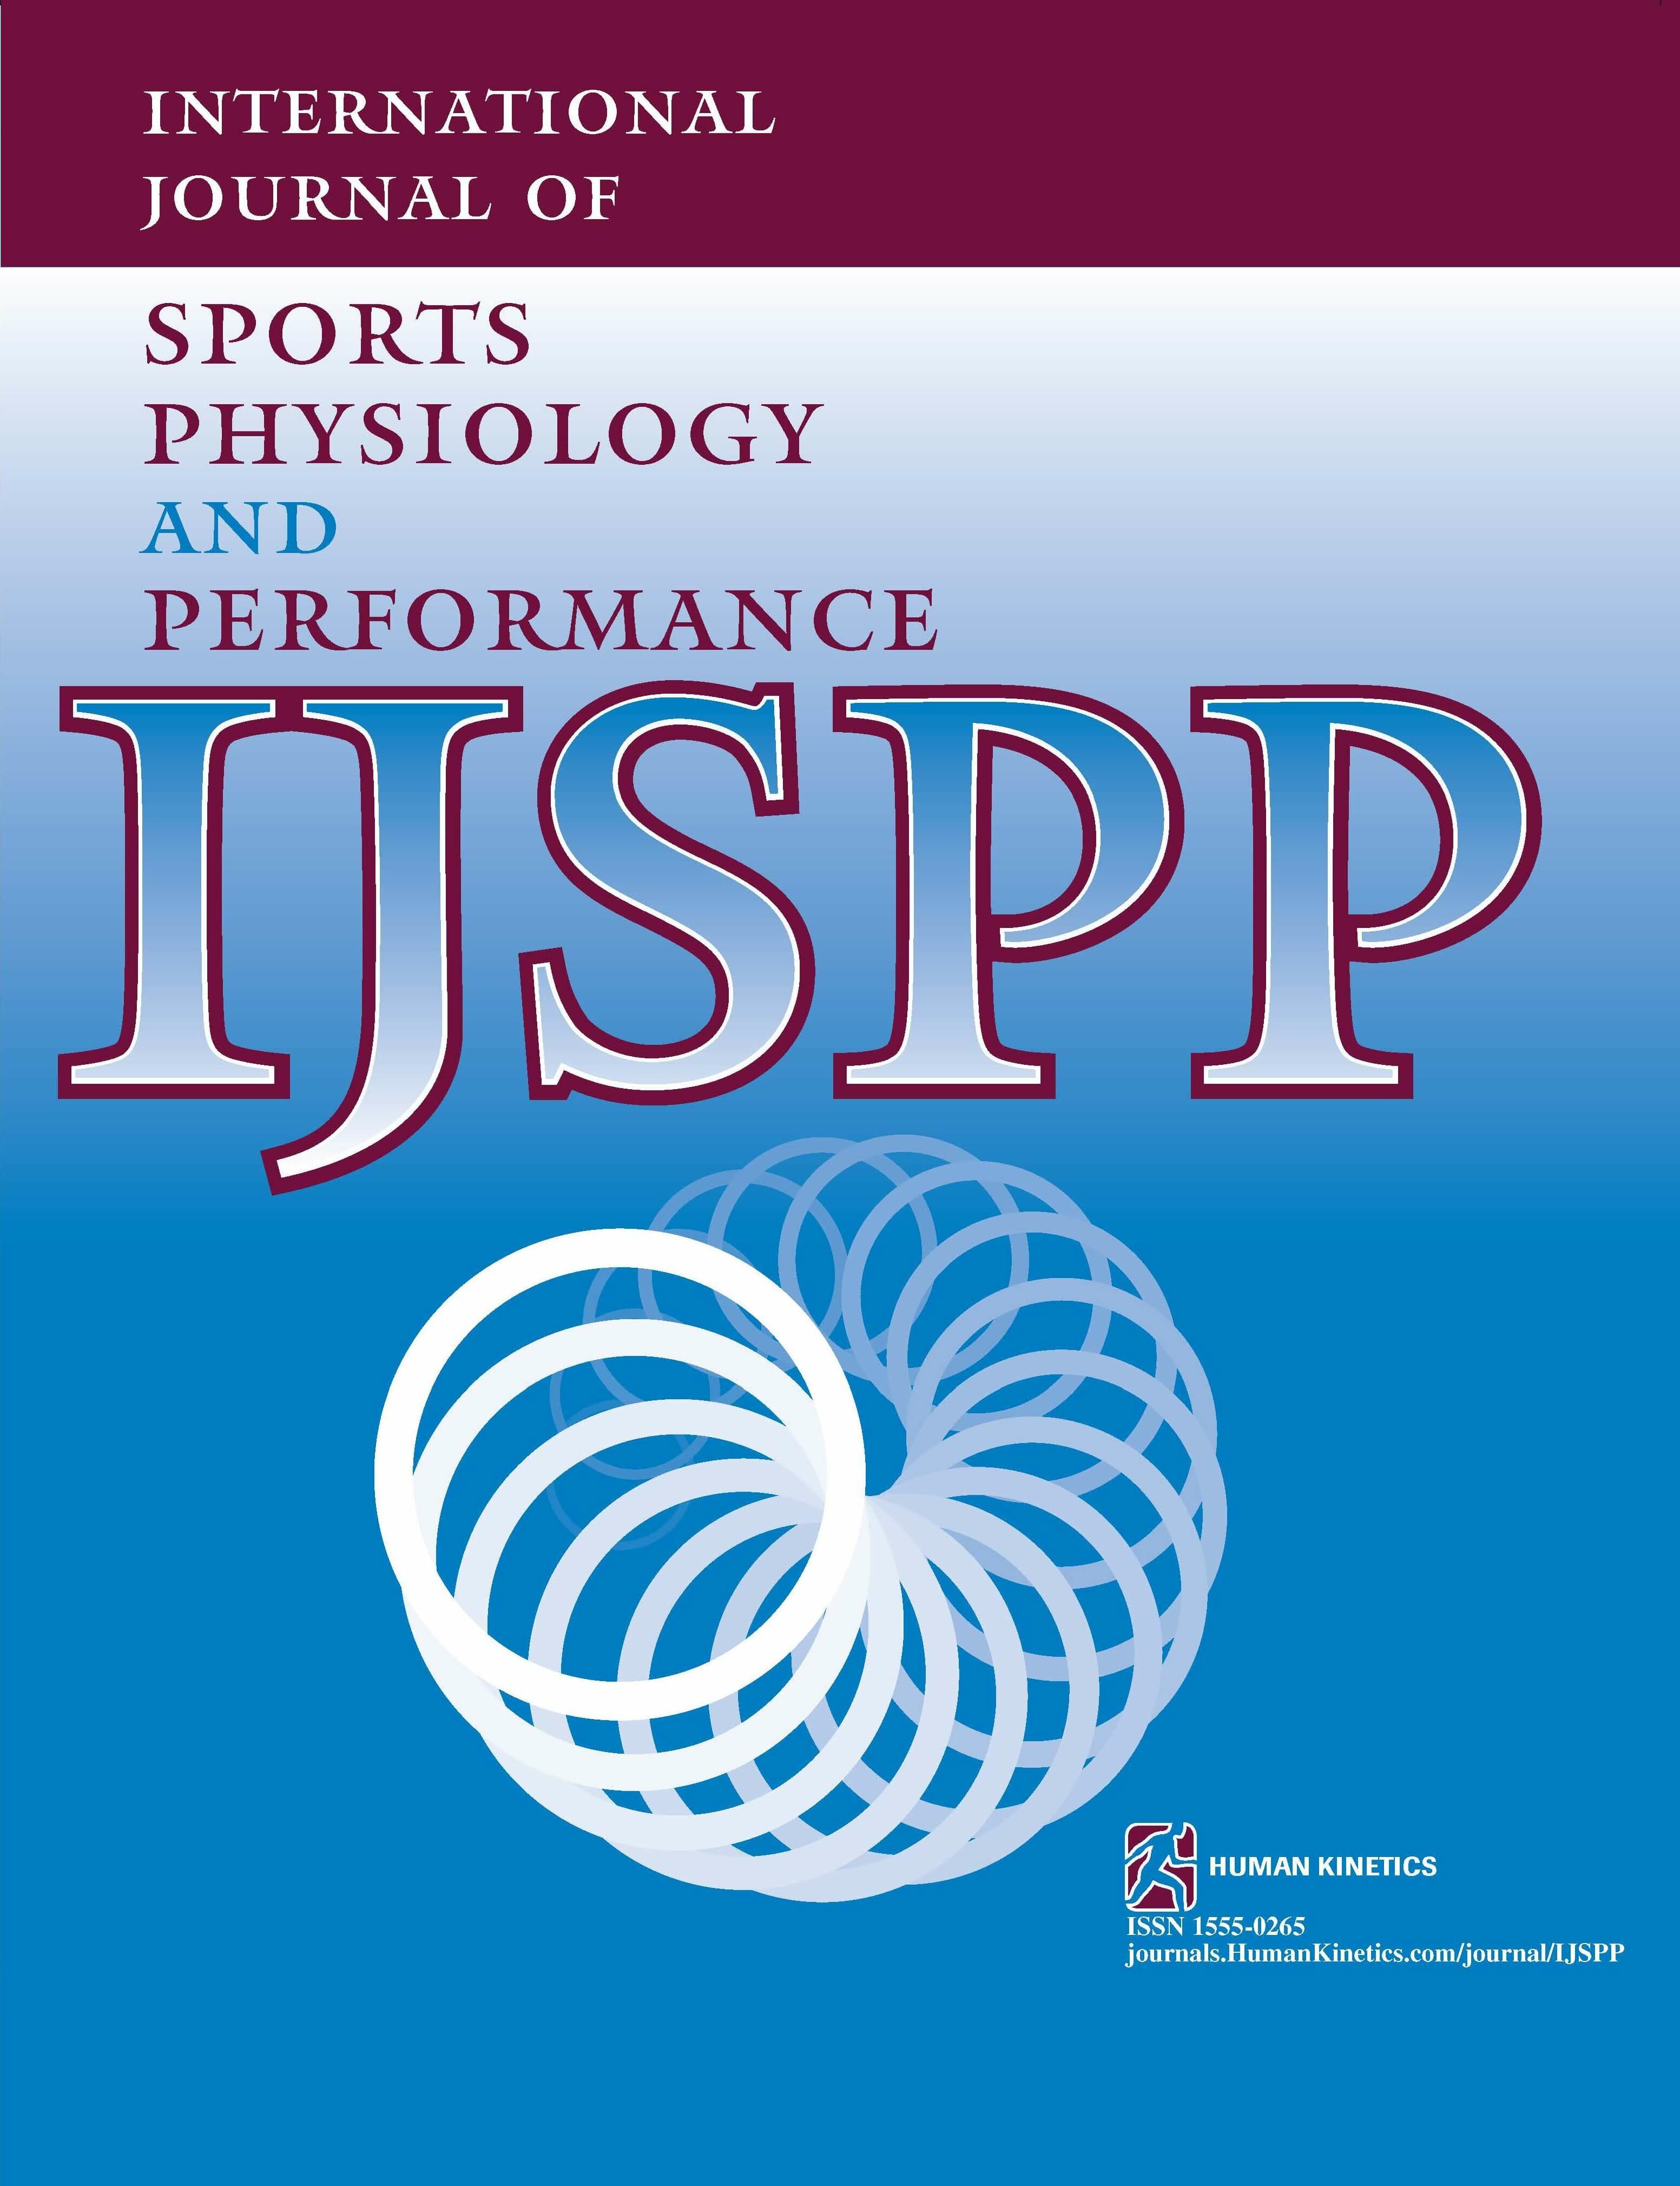 One Long Versus 2 Short Sessions? Physiological and Perceptual Responses to Low-Intensity Training at Self-Selected Speeds in Cross-Country Skiers